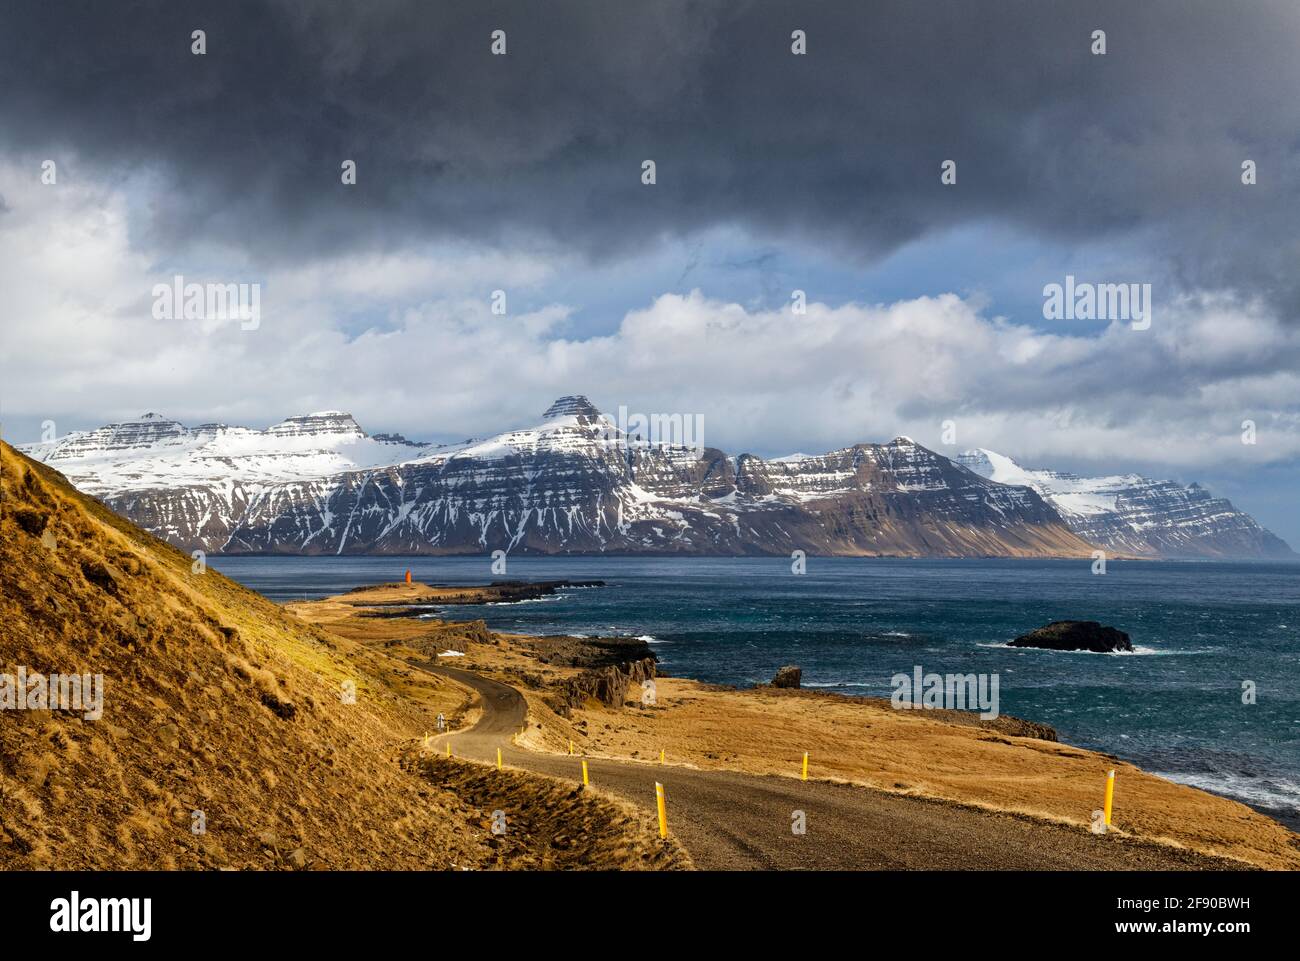 Landscape with coastal road and snowcapped mountains in background, Iceland Stock Photo